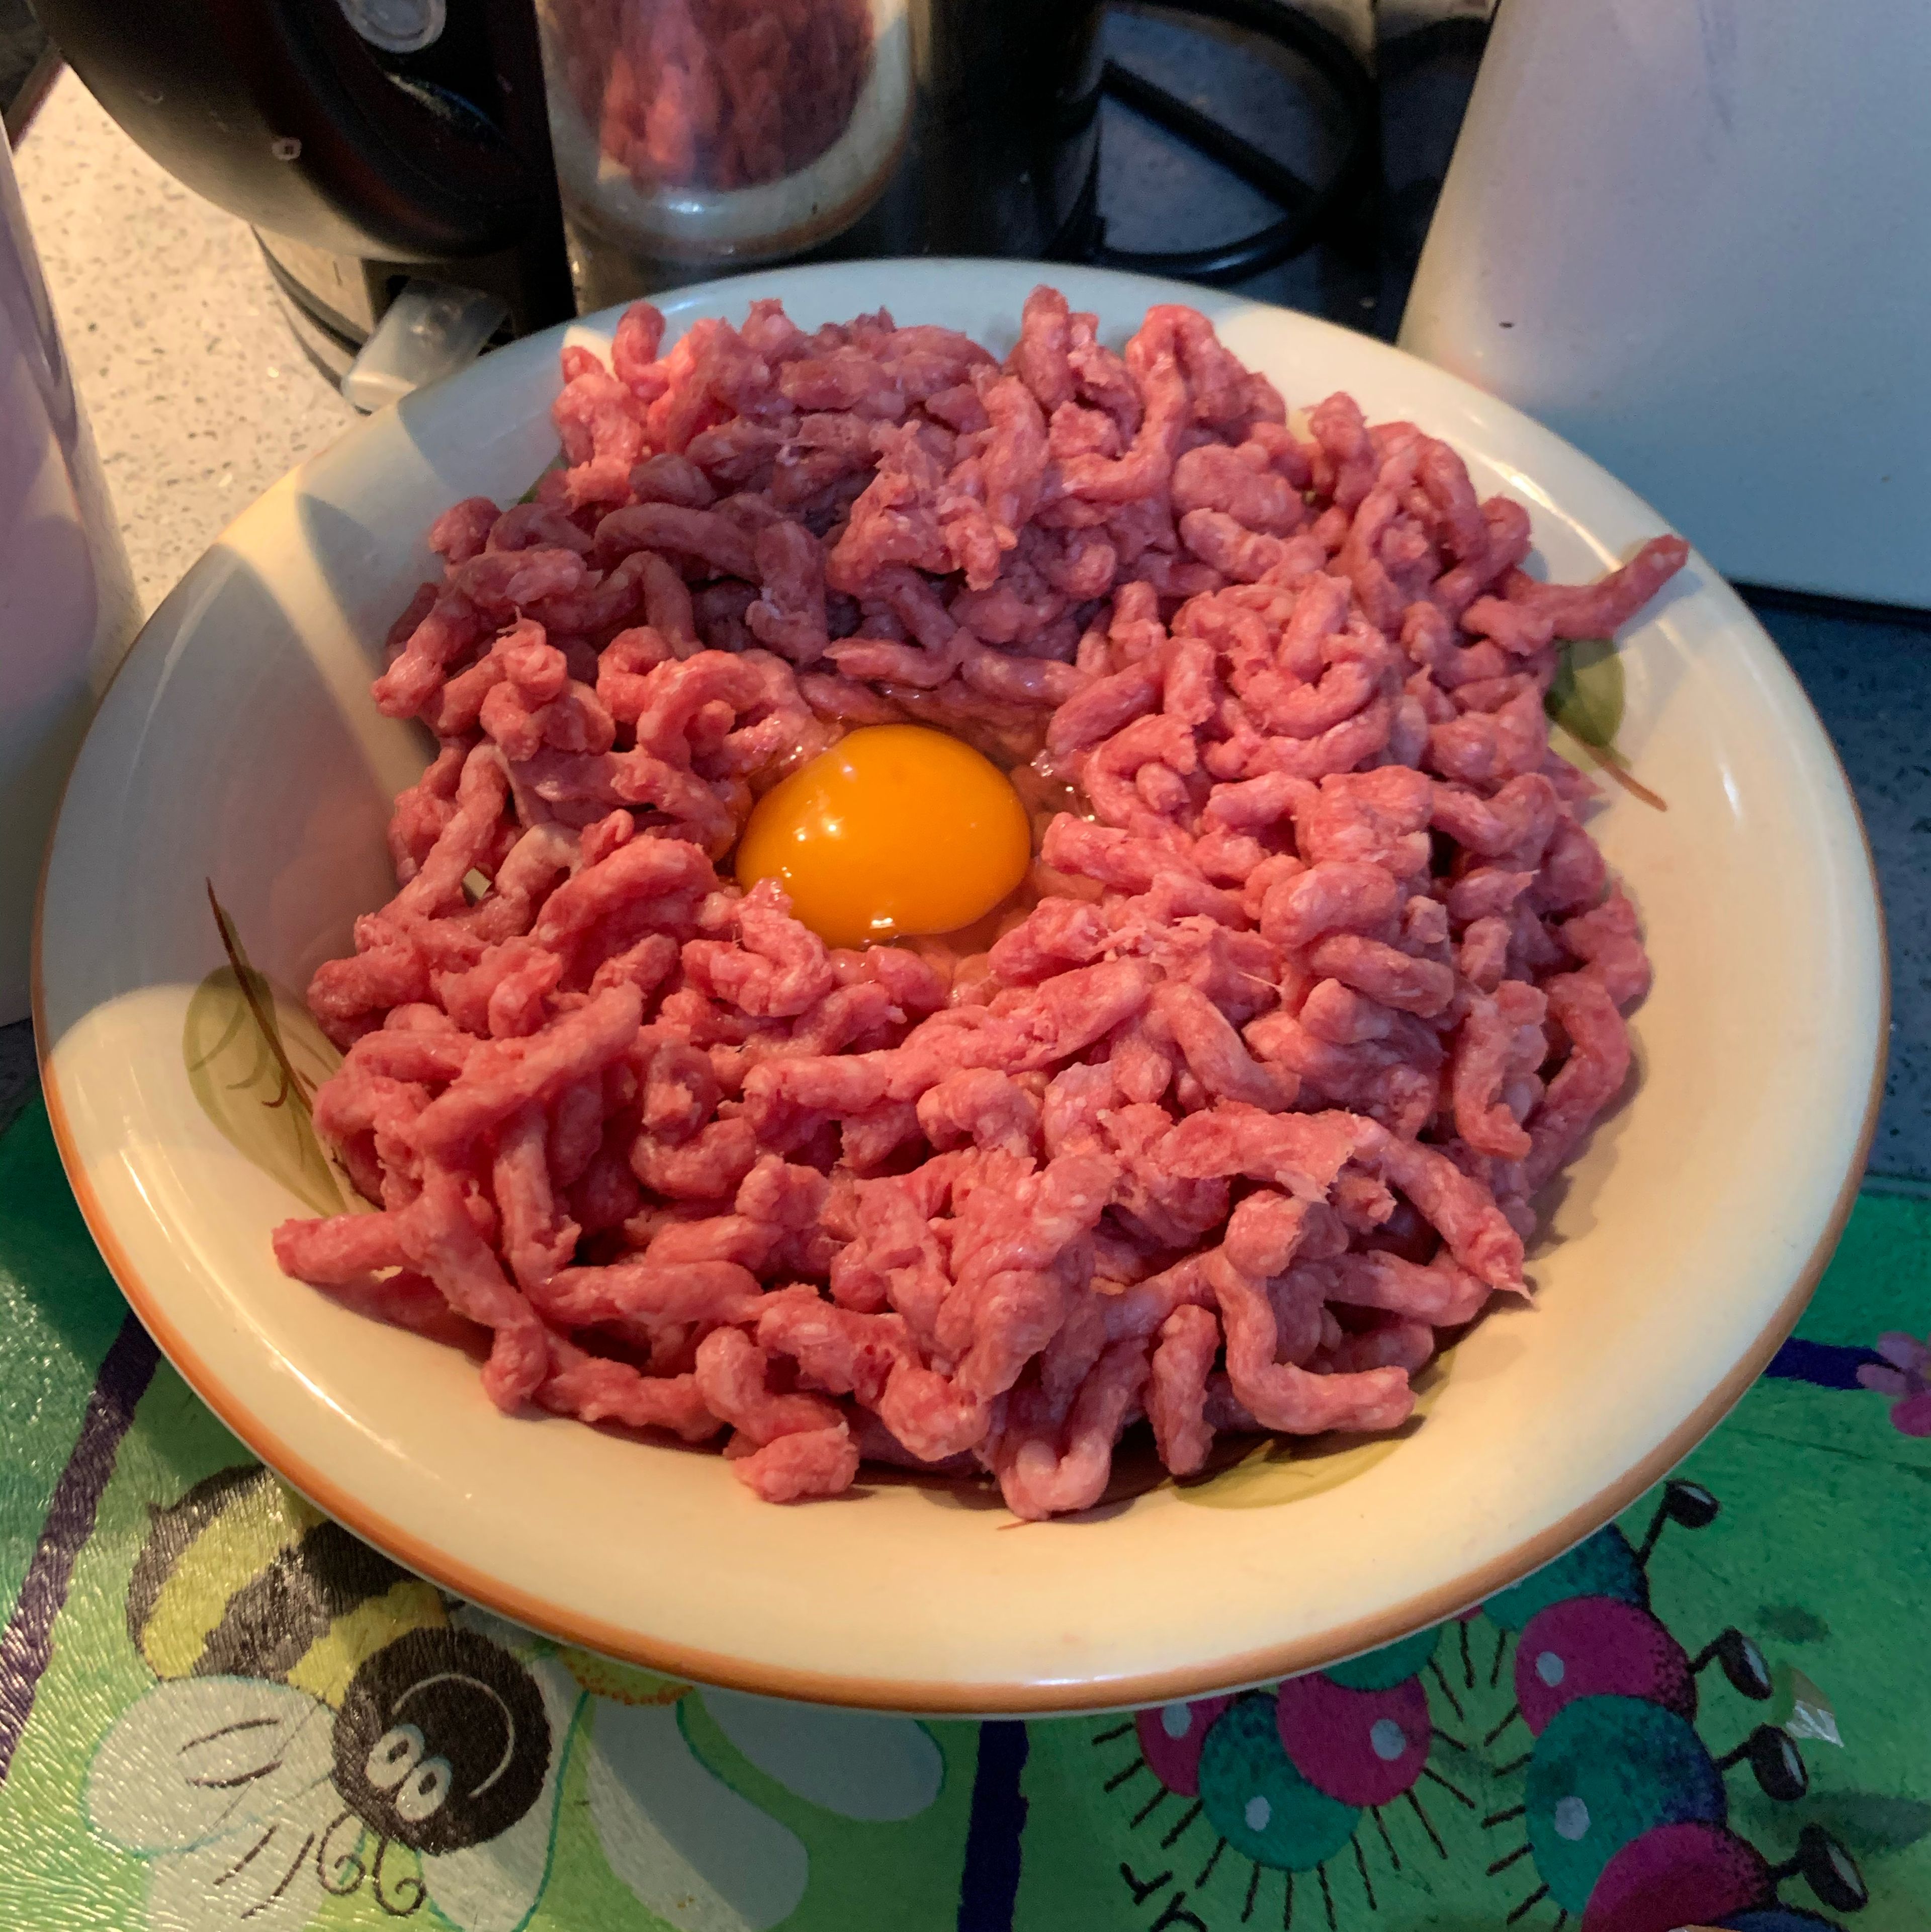 Prepare the steak mince by putting the 250g of mince in a bowl and add one whole egg.